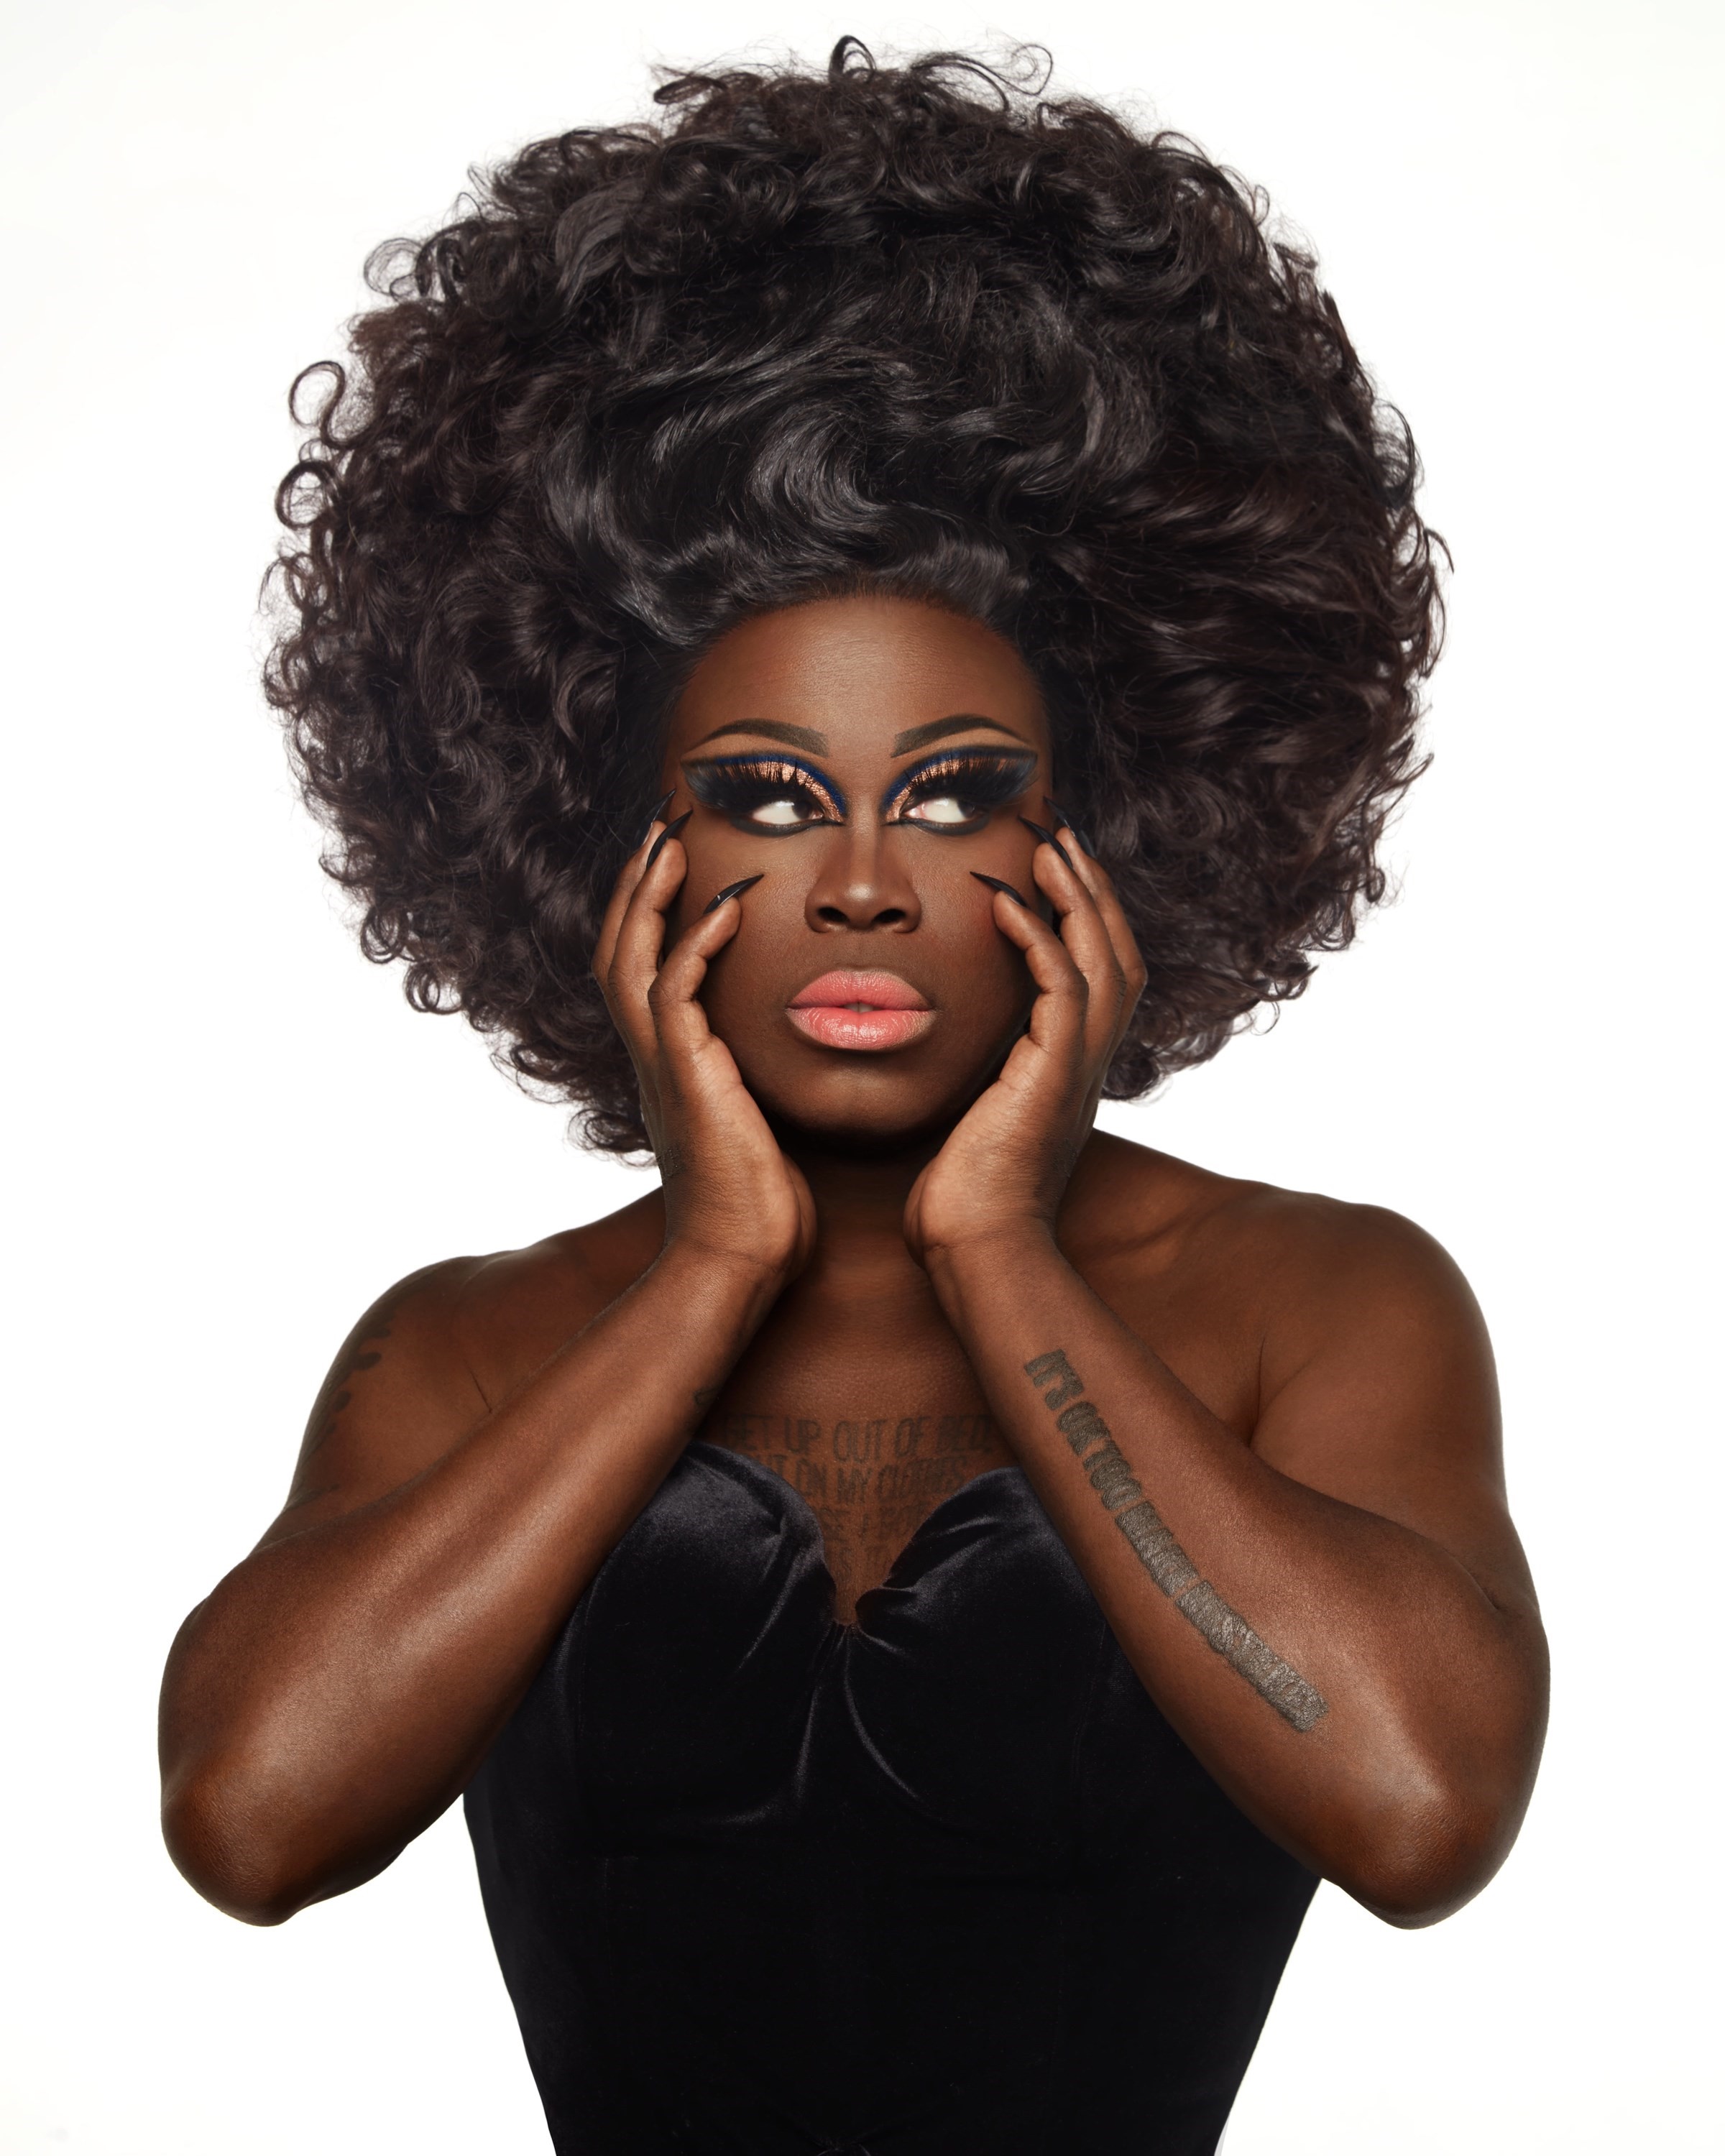 50 Questions With Bob The Drag Queen Another